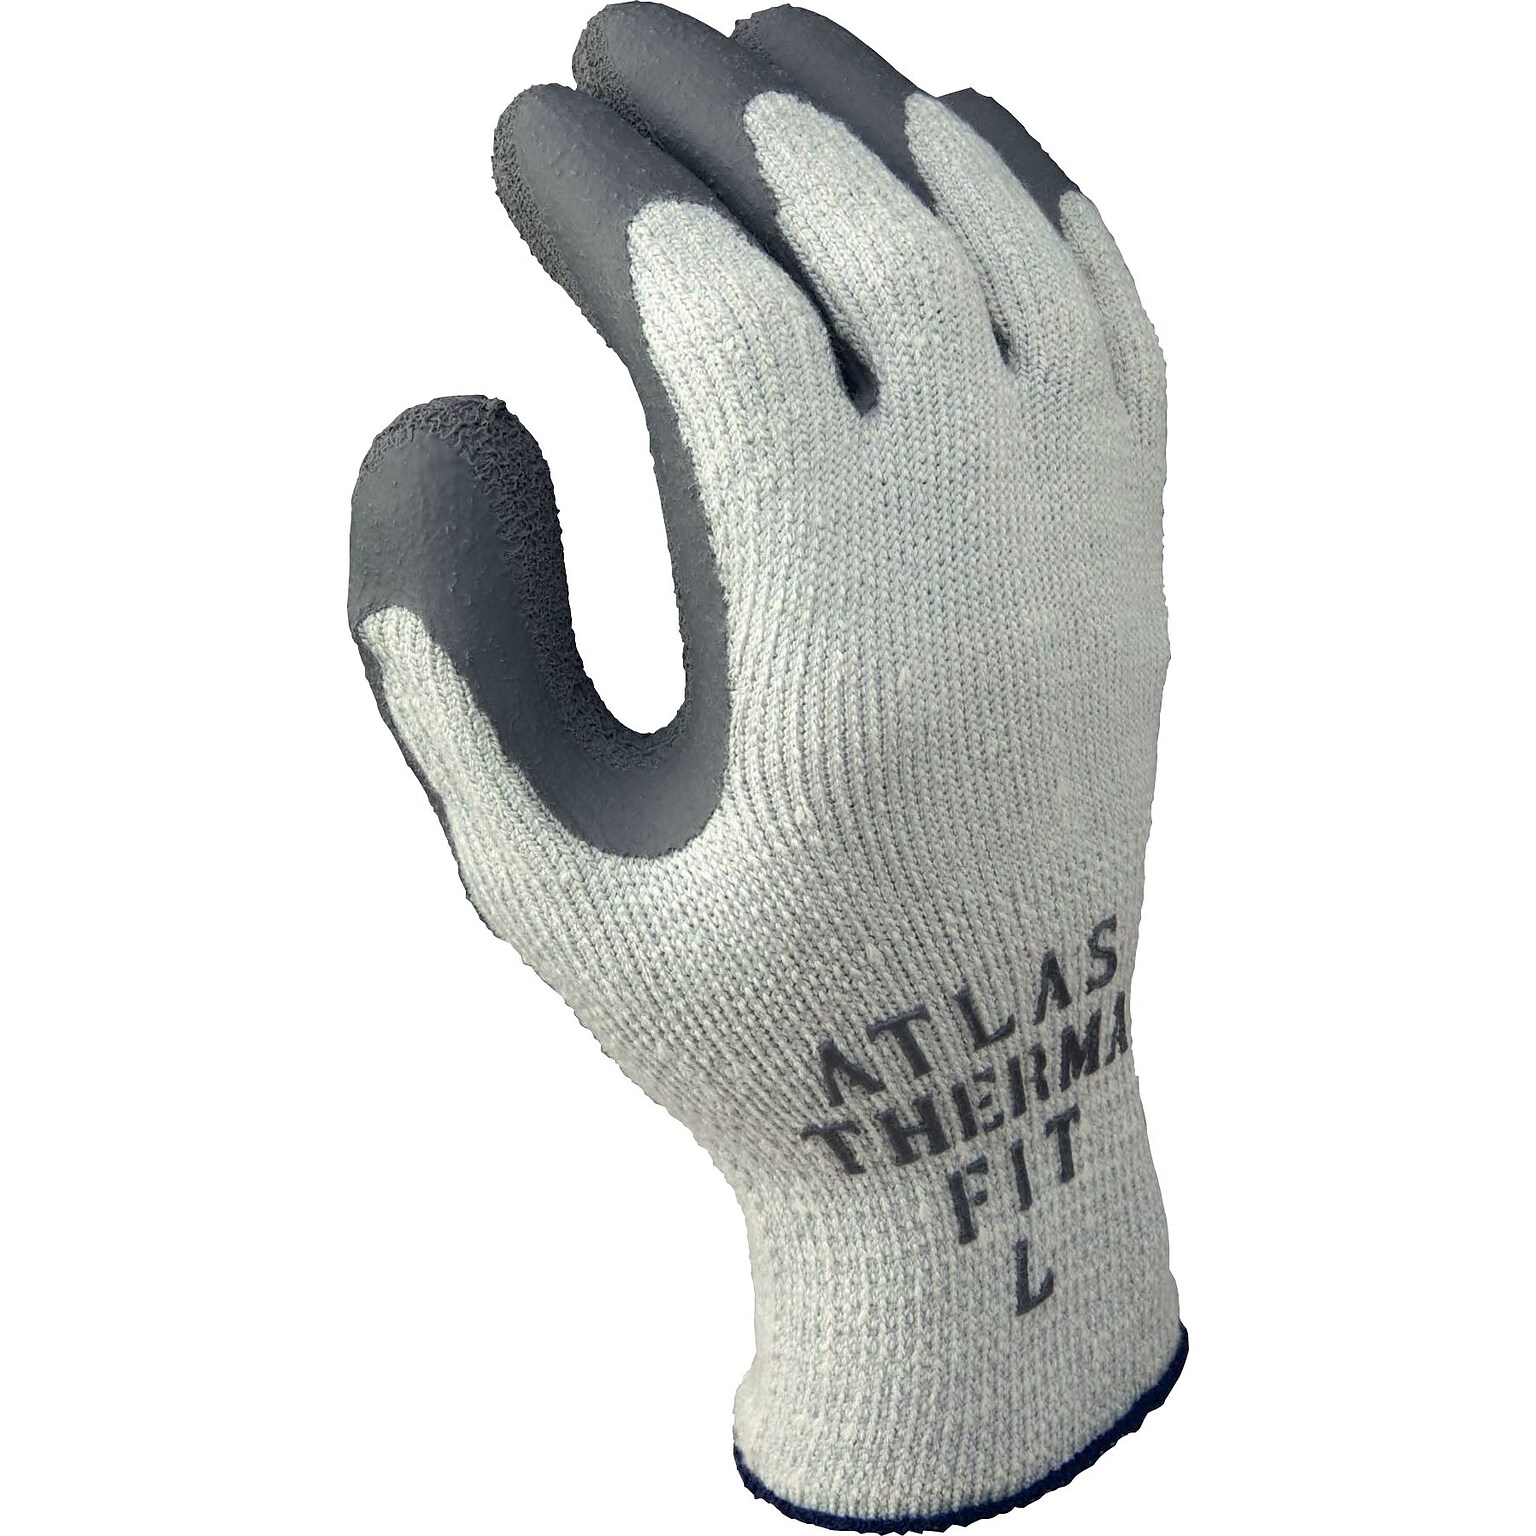 Showa Thermo 451 Polyurethane Coated Cold Resistant Cotton/Poly Gloves, Large, Gray, 12 Pairs/Box (451-09)